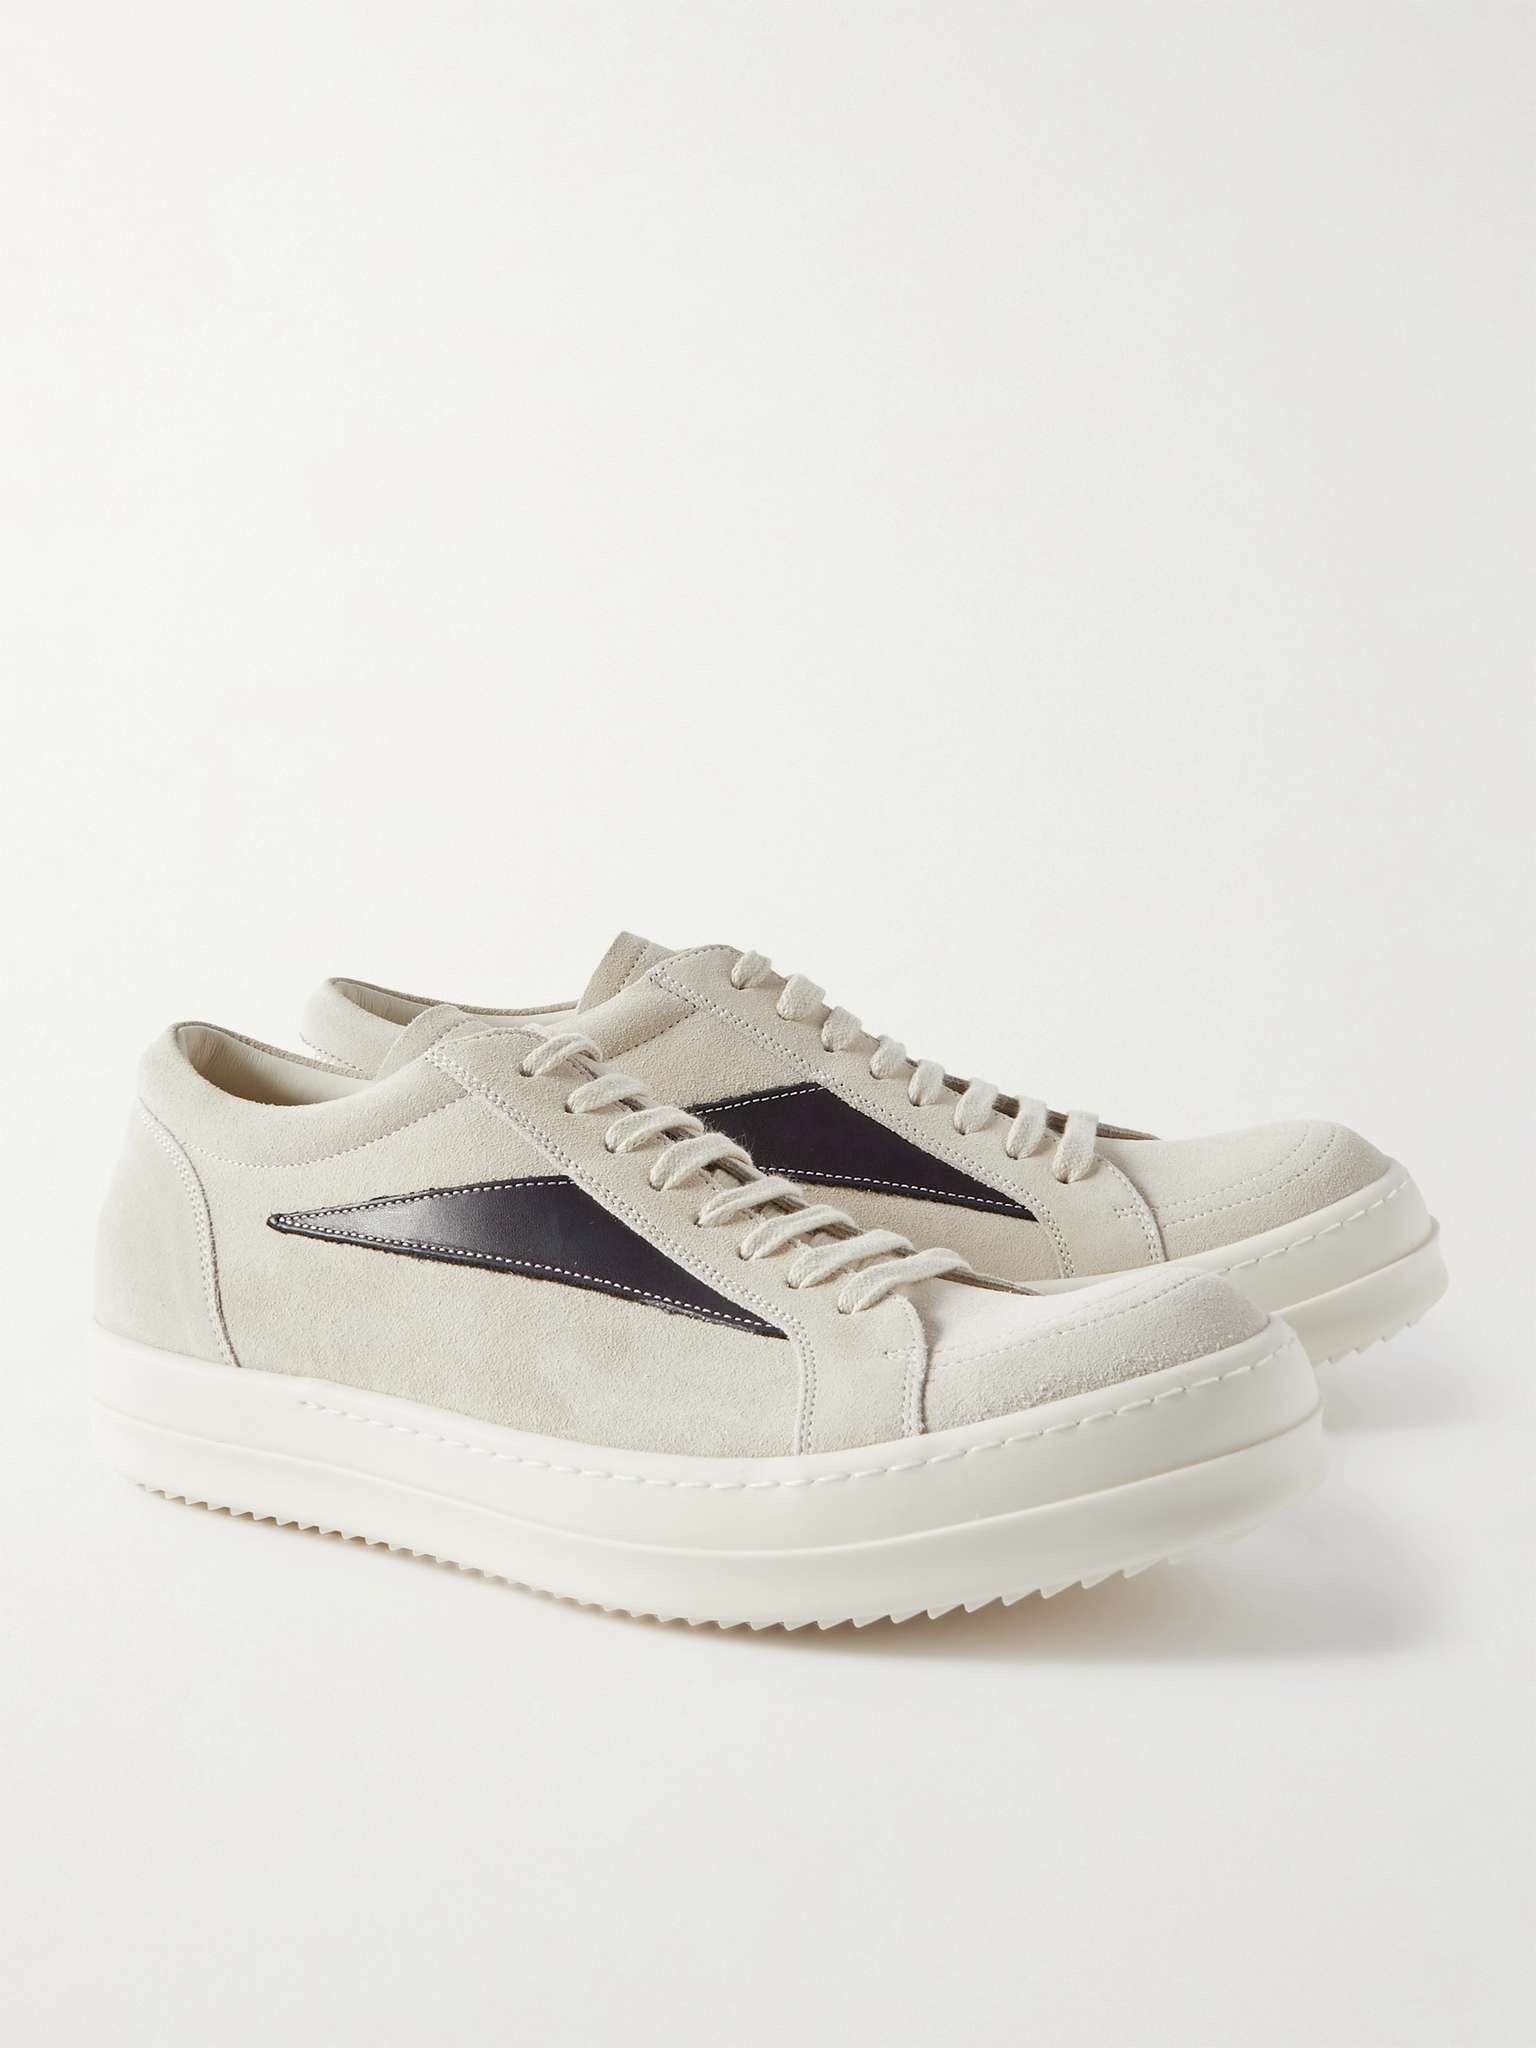 Vintage Leather-Trimmed Suede Sneakers - 4